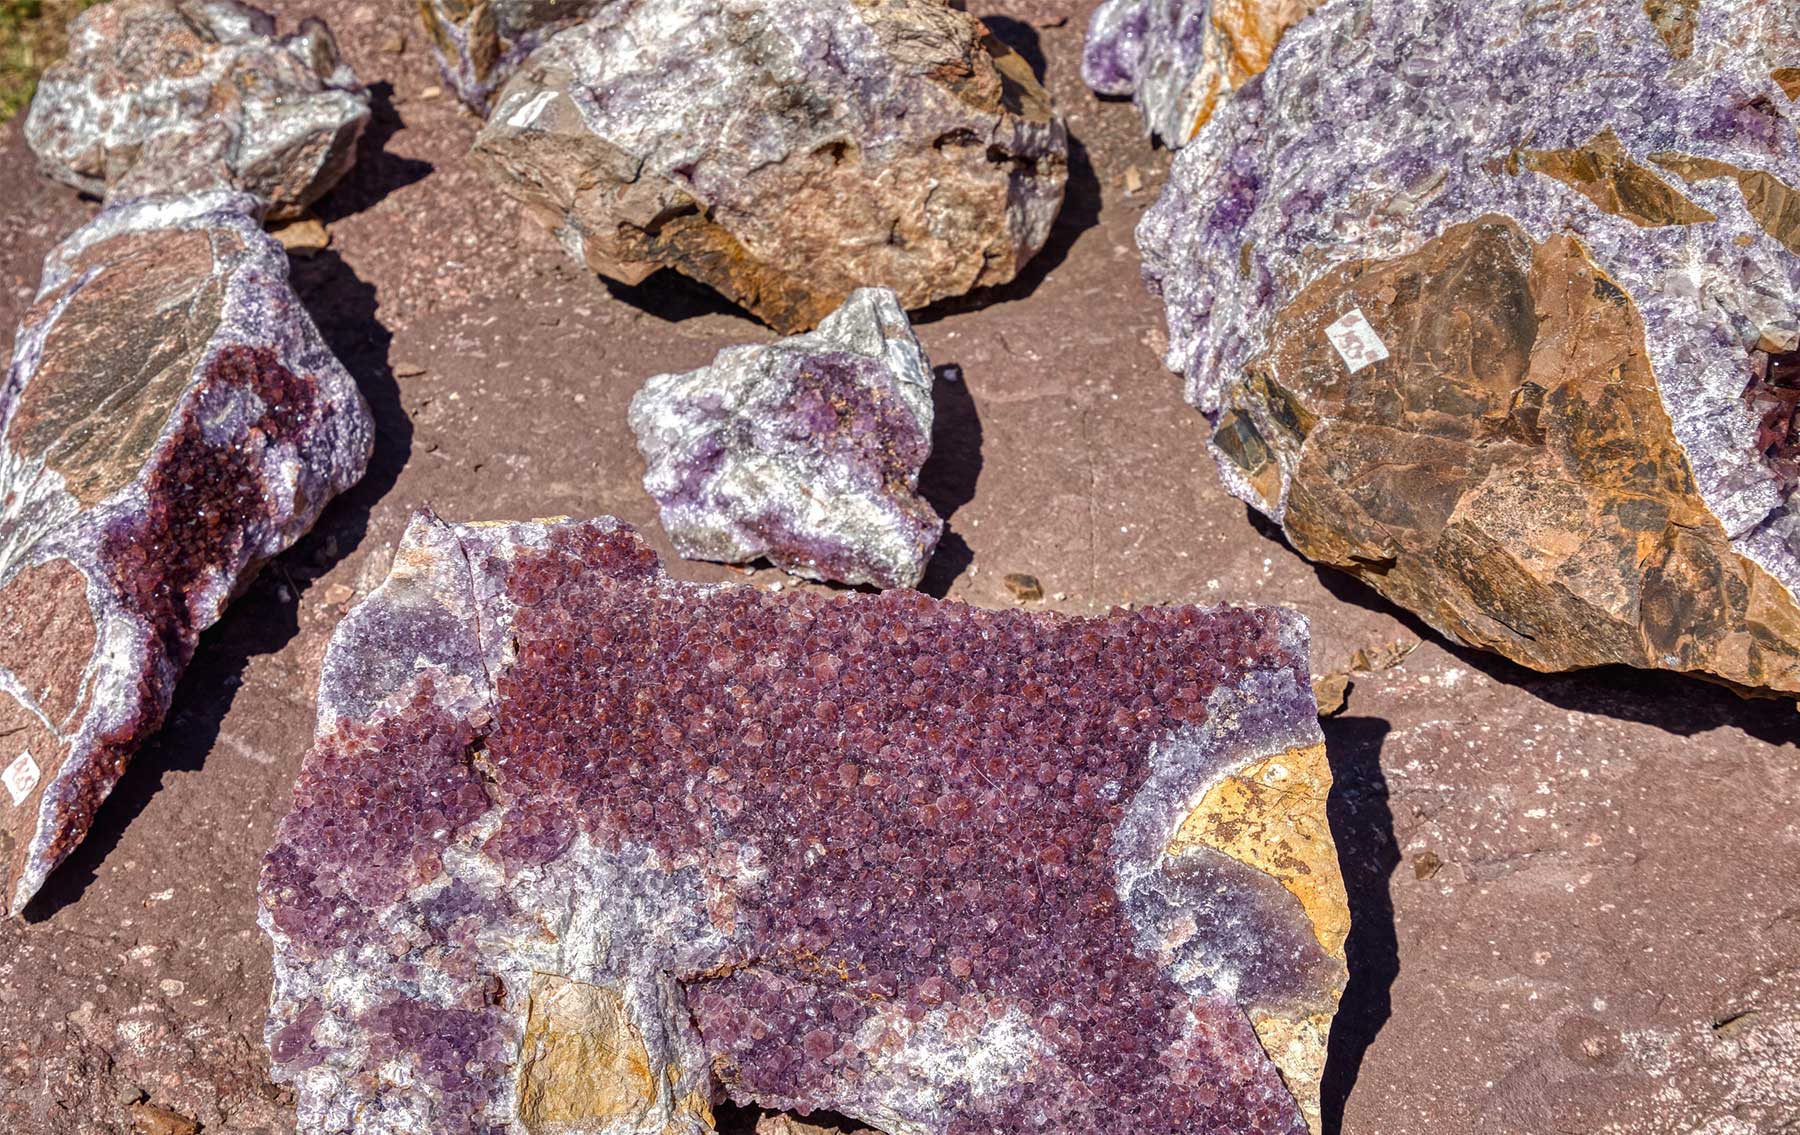 Amethyst mining and processing